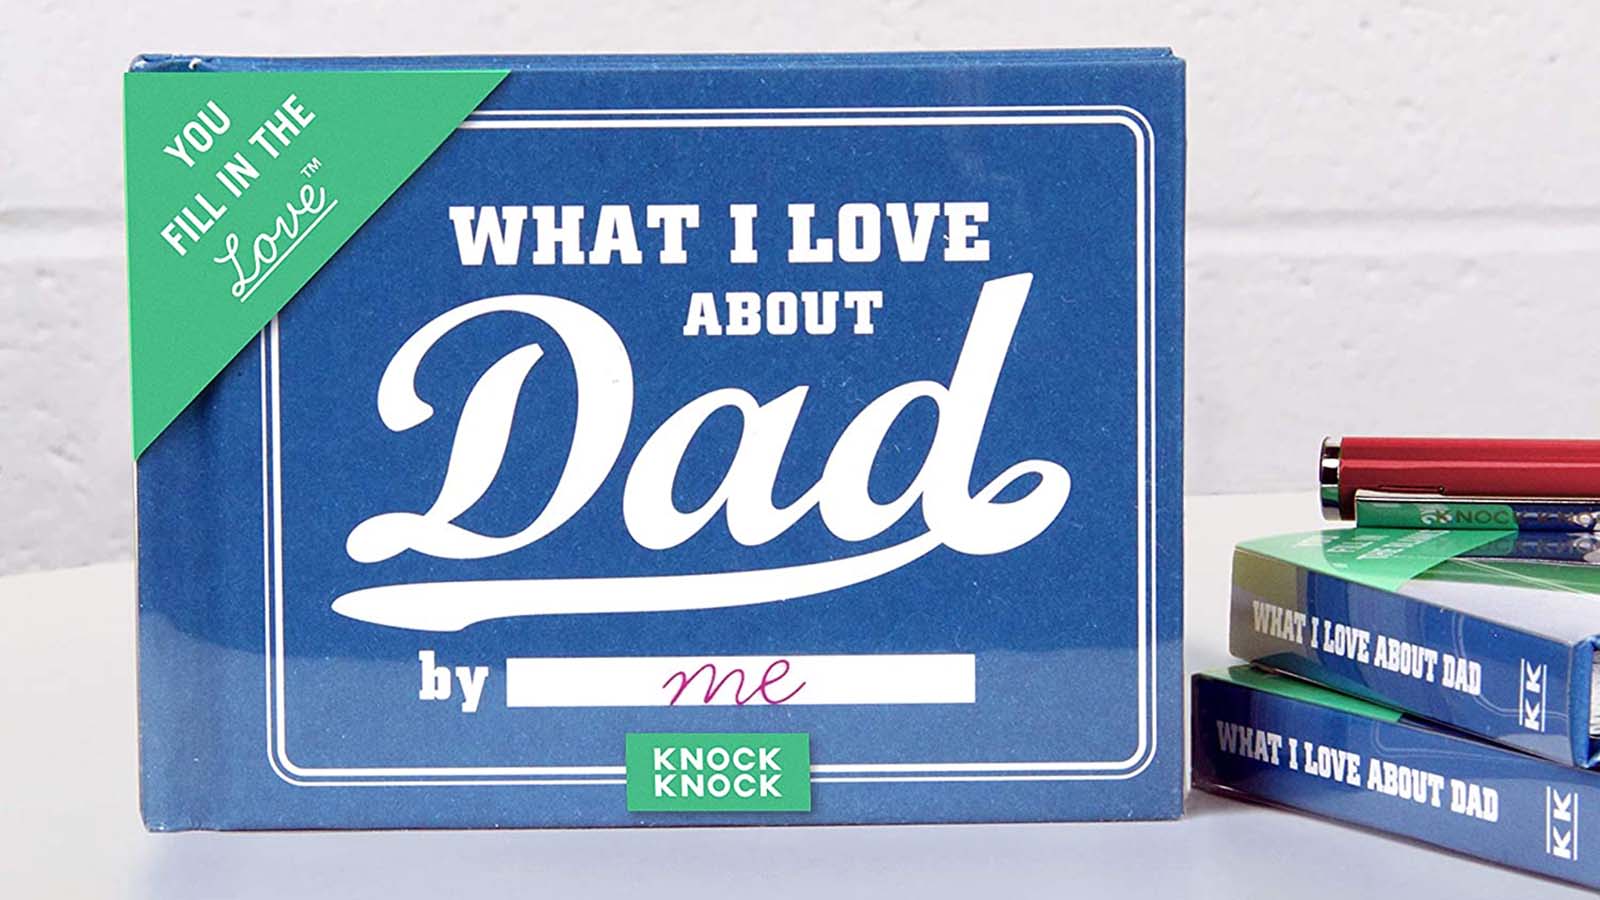 Father's Day Gift Ideas Under $5, $10, $20 and $35